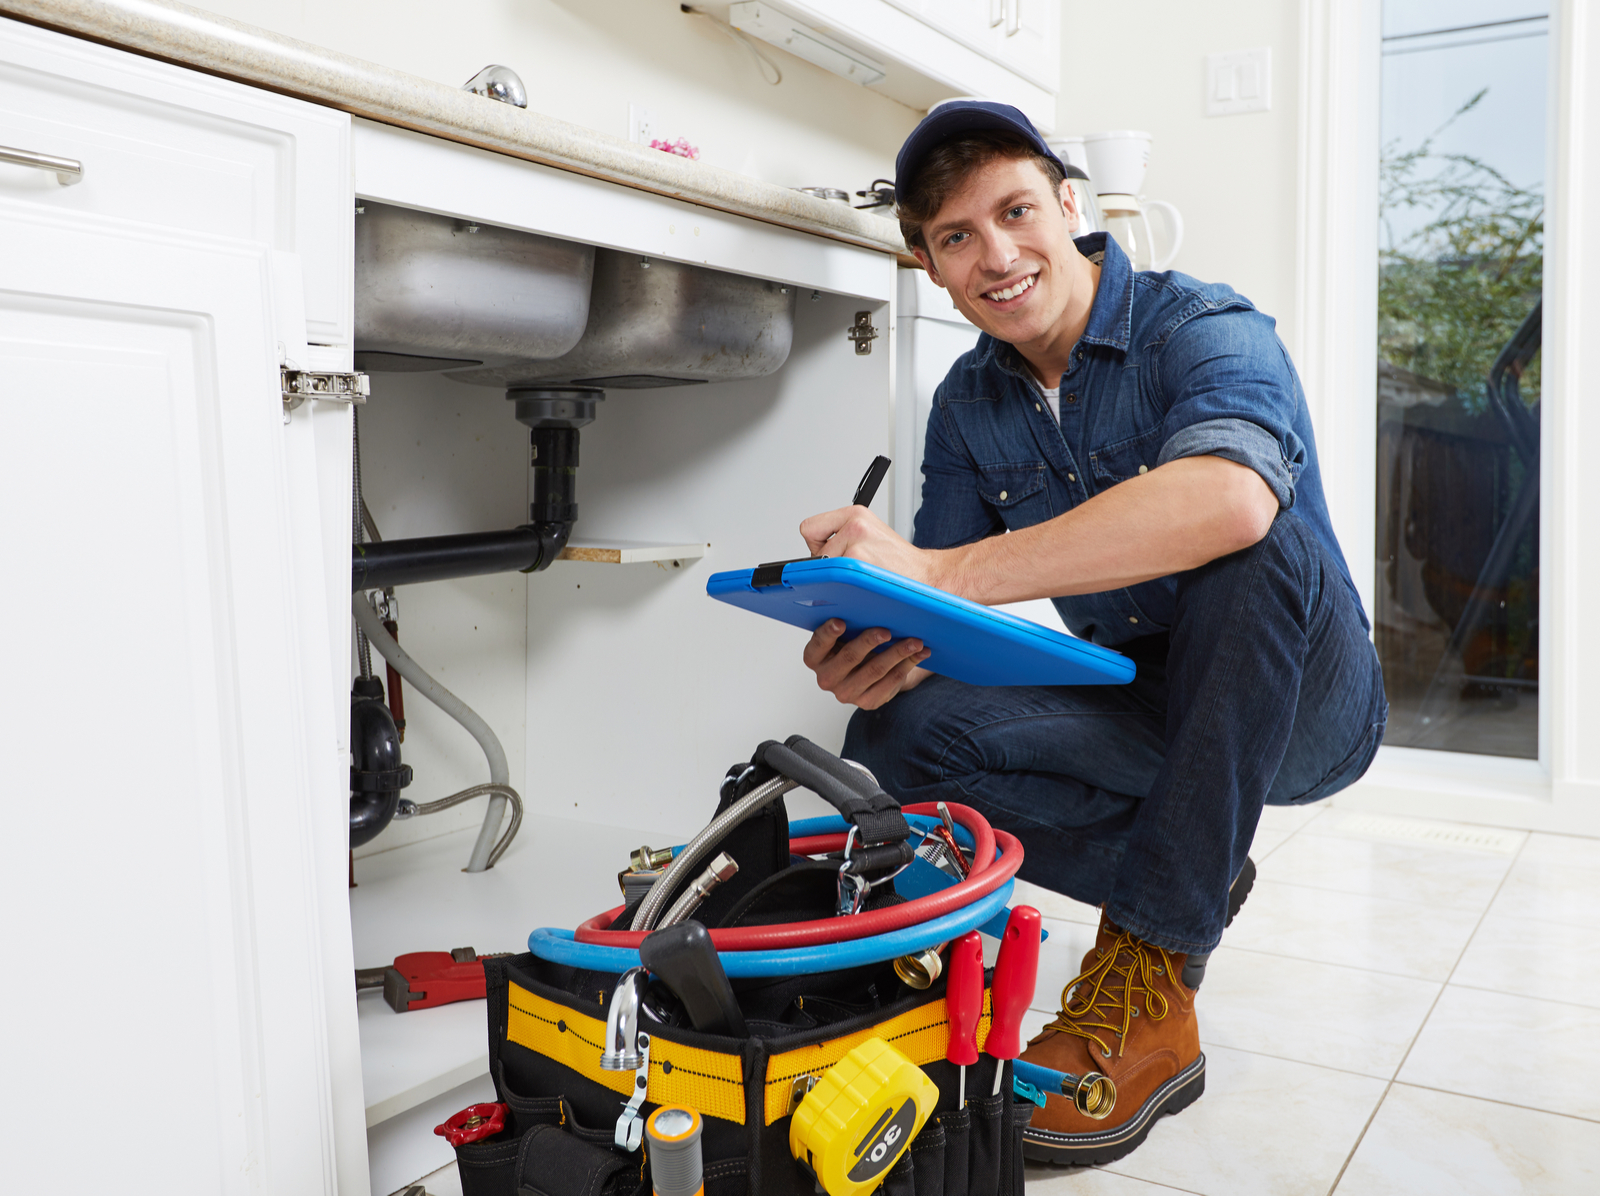 How to Find and Hire a Qualified Plumber